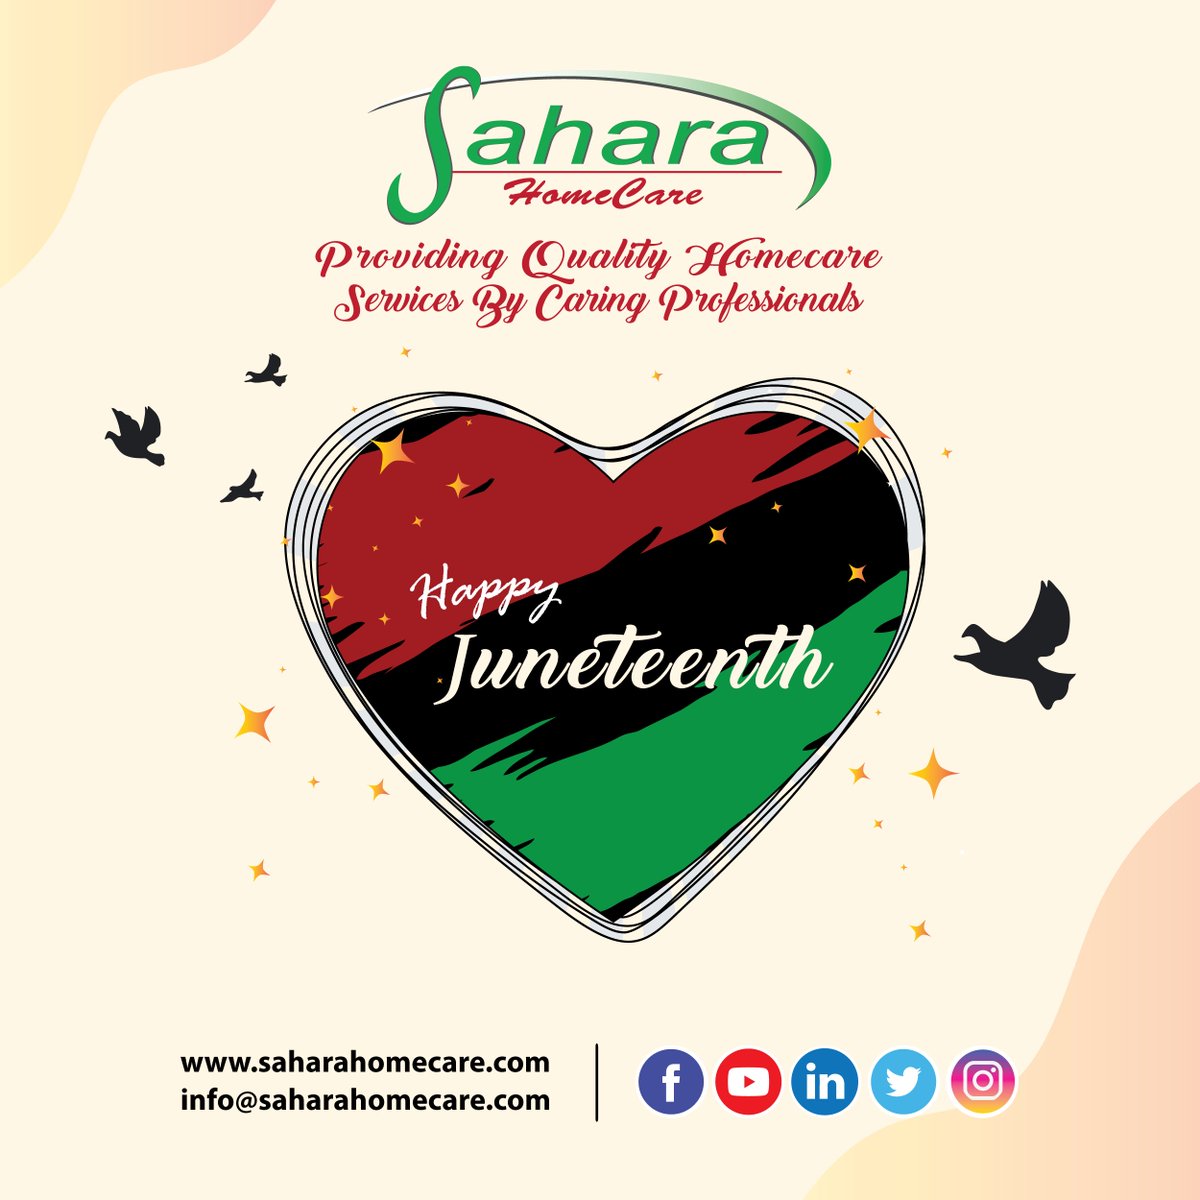 Celebrating freedom and equality. Happy Juneteenth! #homecare #saharahomecare #juneteenth #seniorcare #seniorcareprovider #homecareprovider #homecareaide #ccpprogram